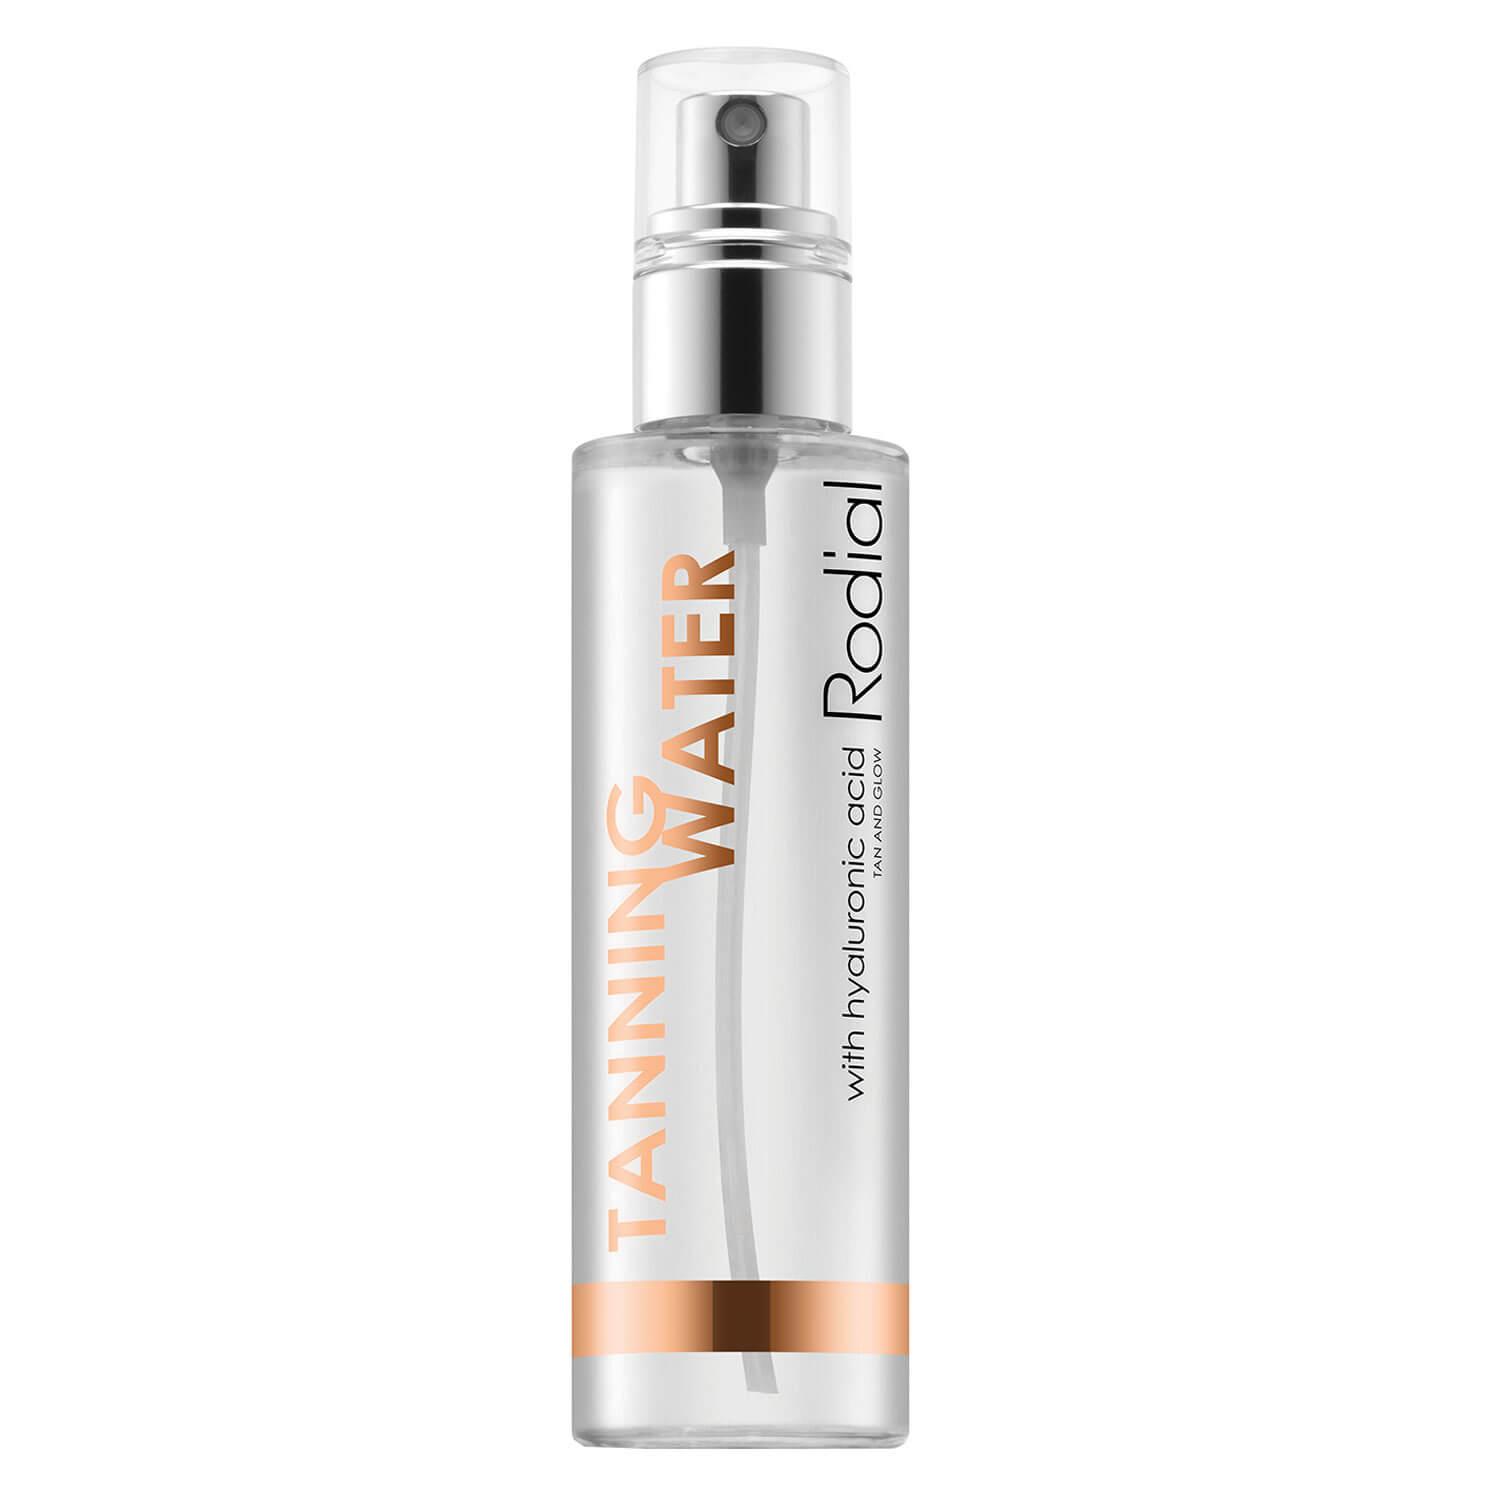 Rodial - Tanning Water